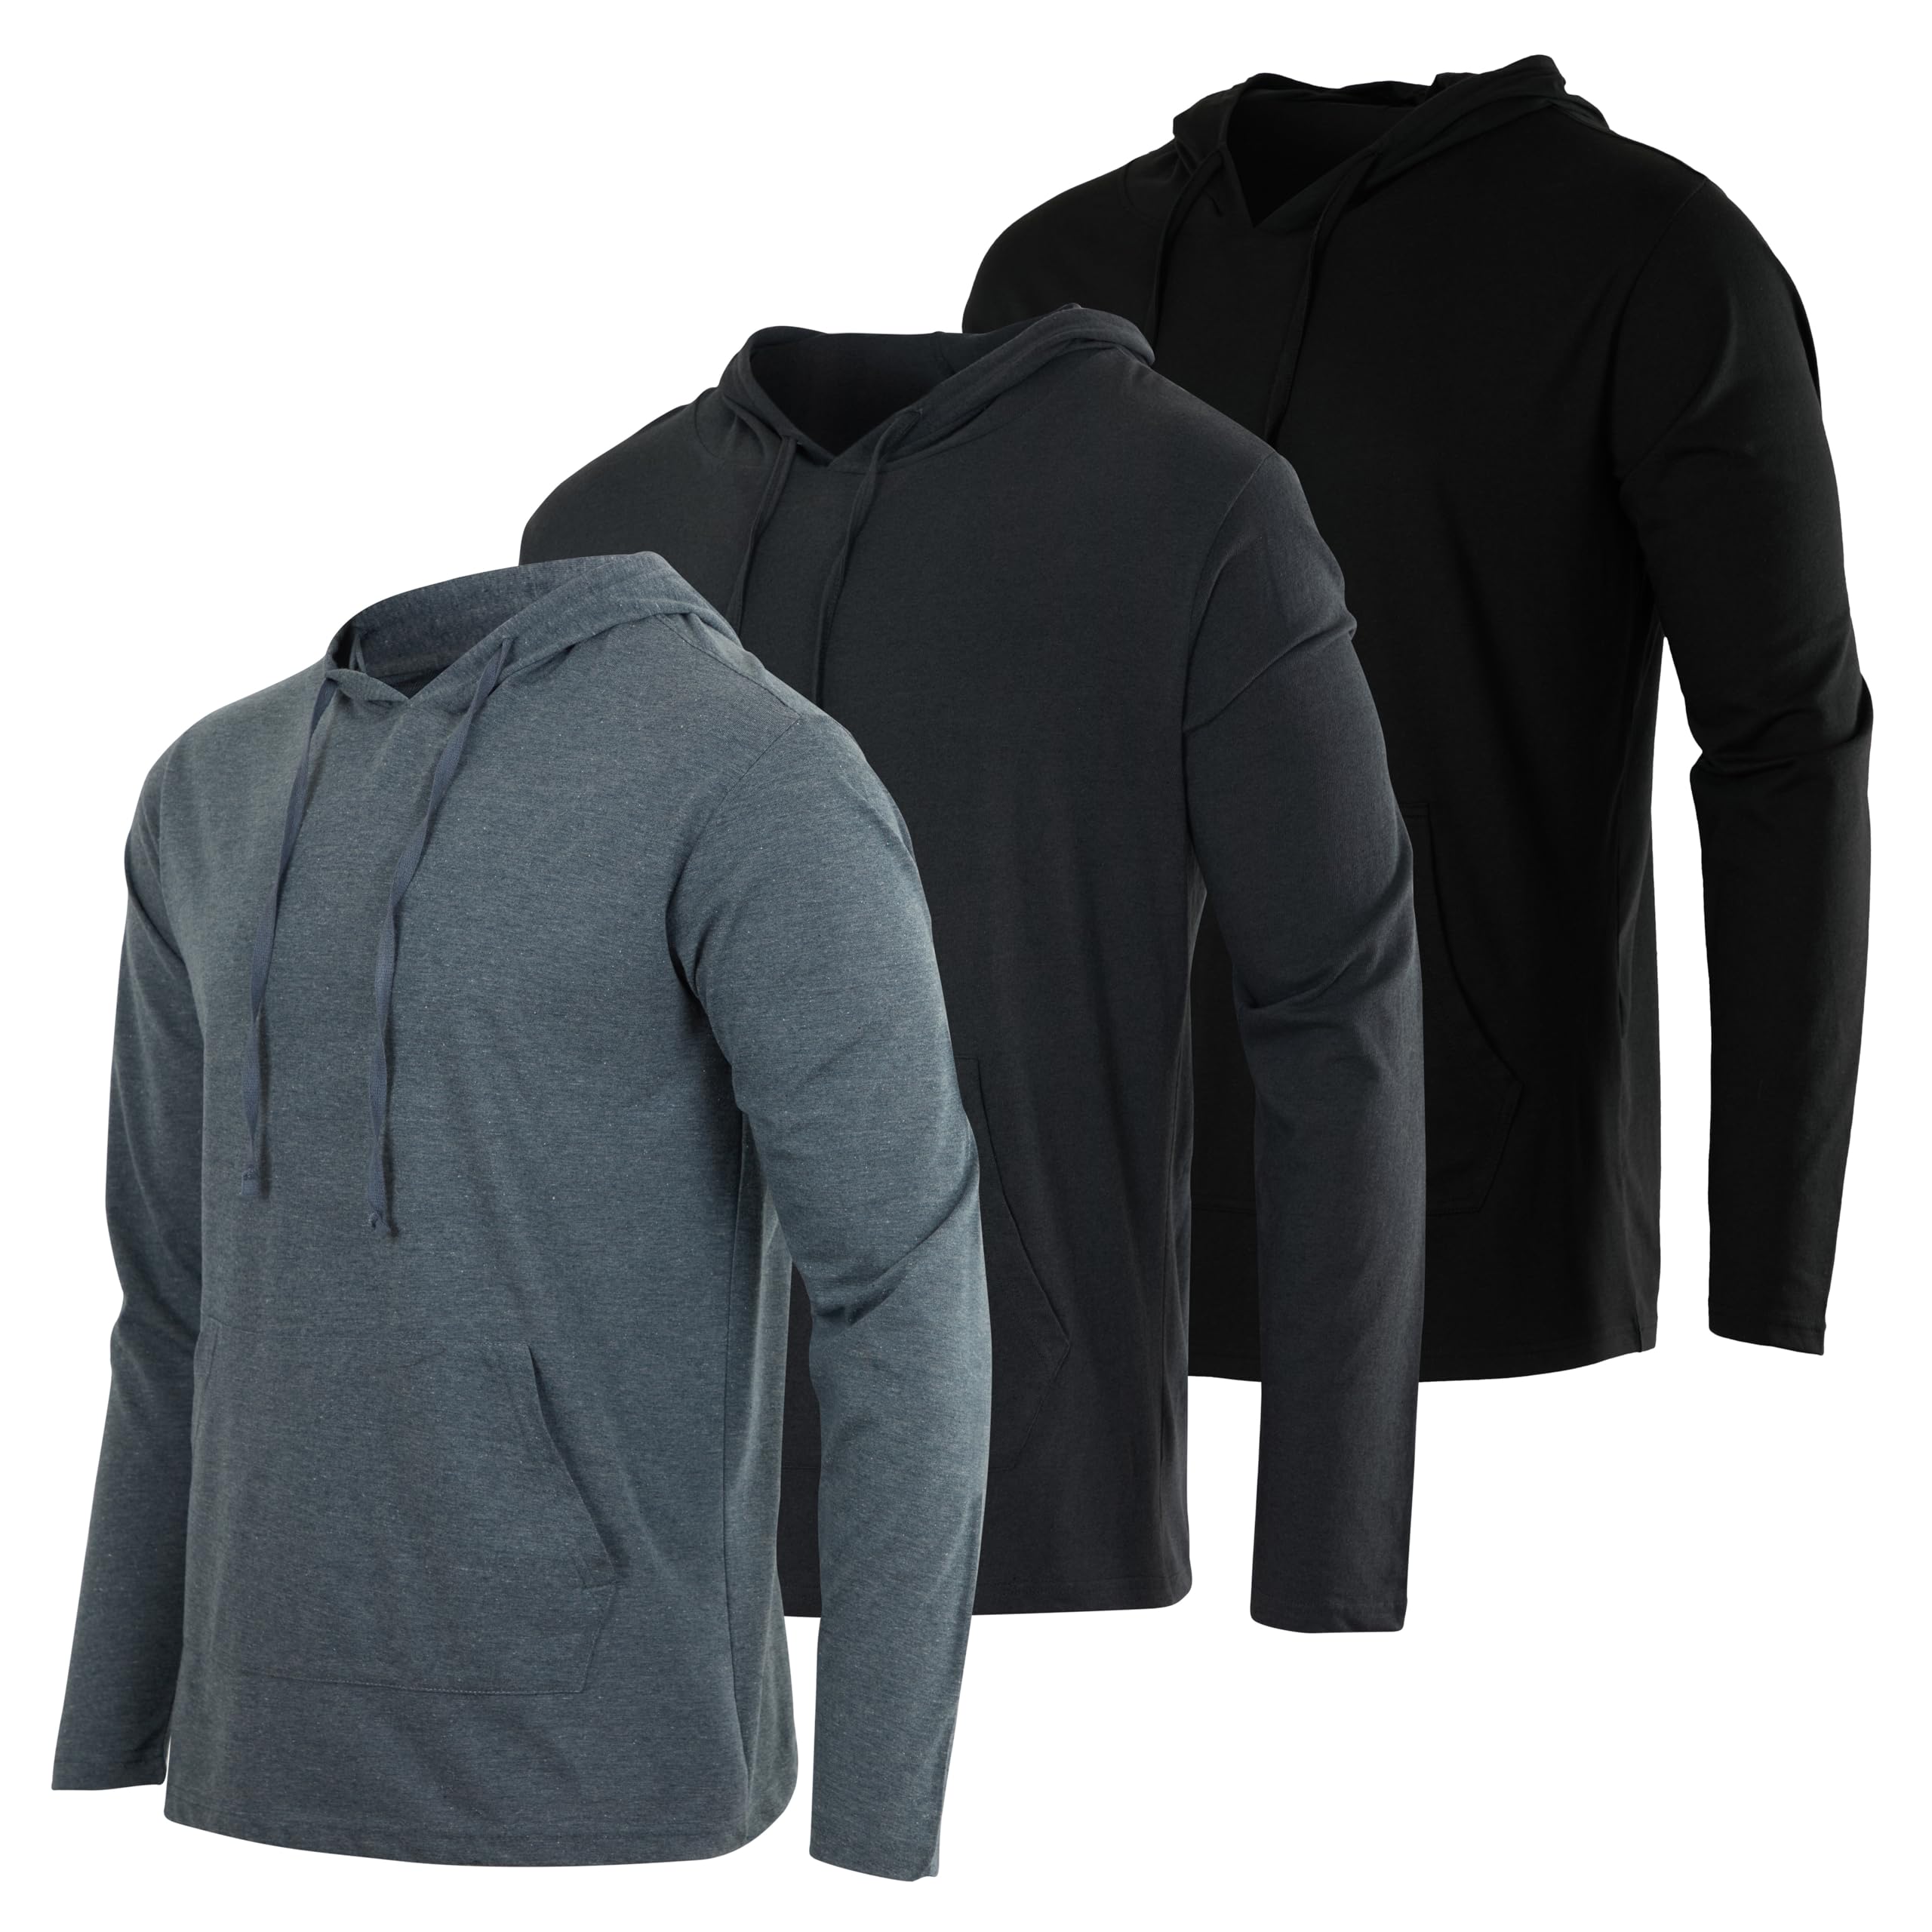 Real Essentials 3 Pack: Men's Cotton Lightweight Casual Pullover Drawstring Hoodie With Pocket (Available In Big & Tall)